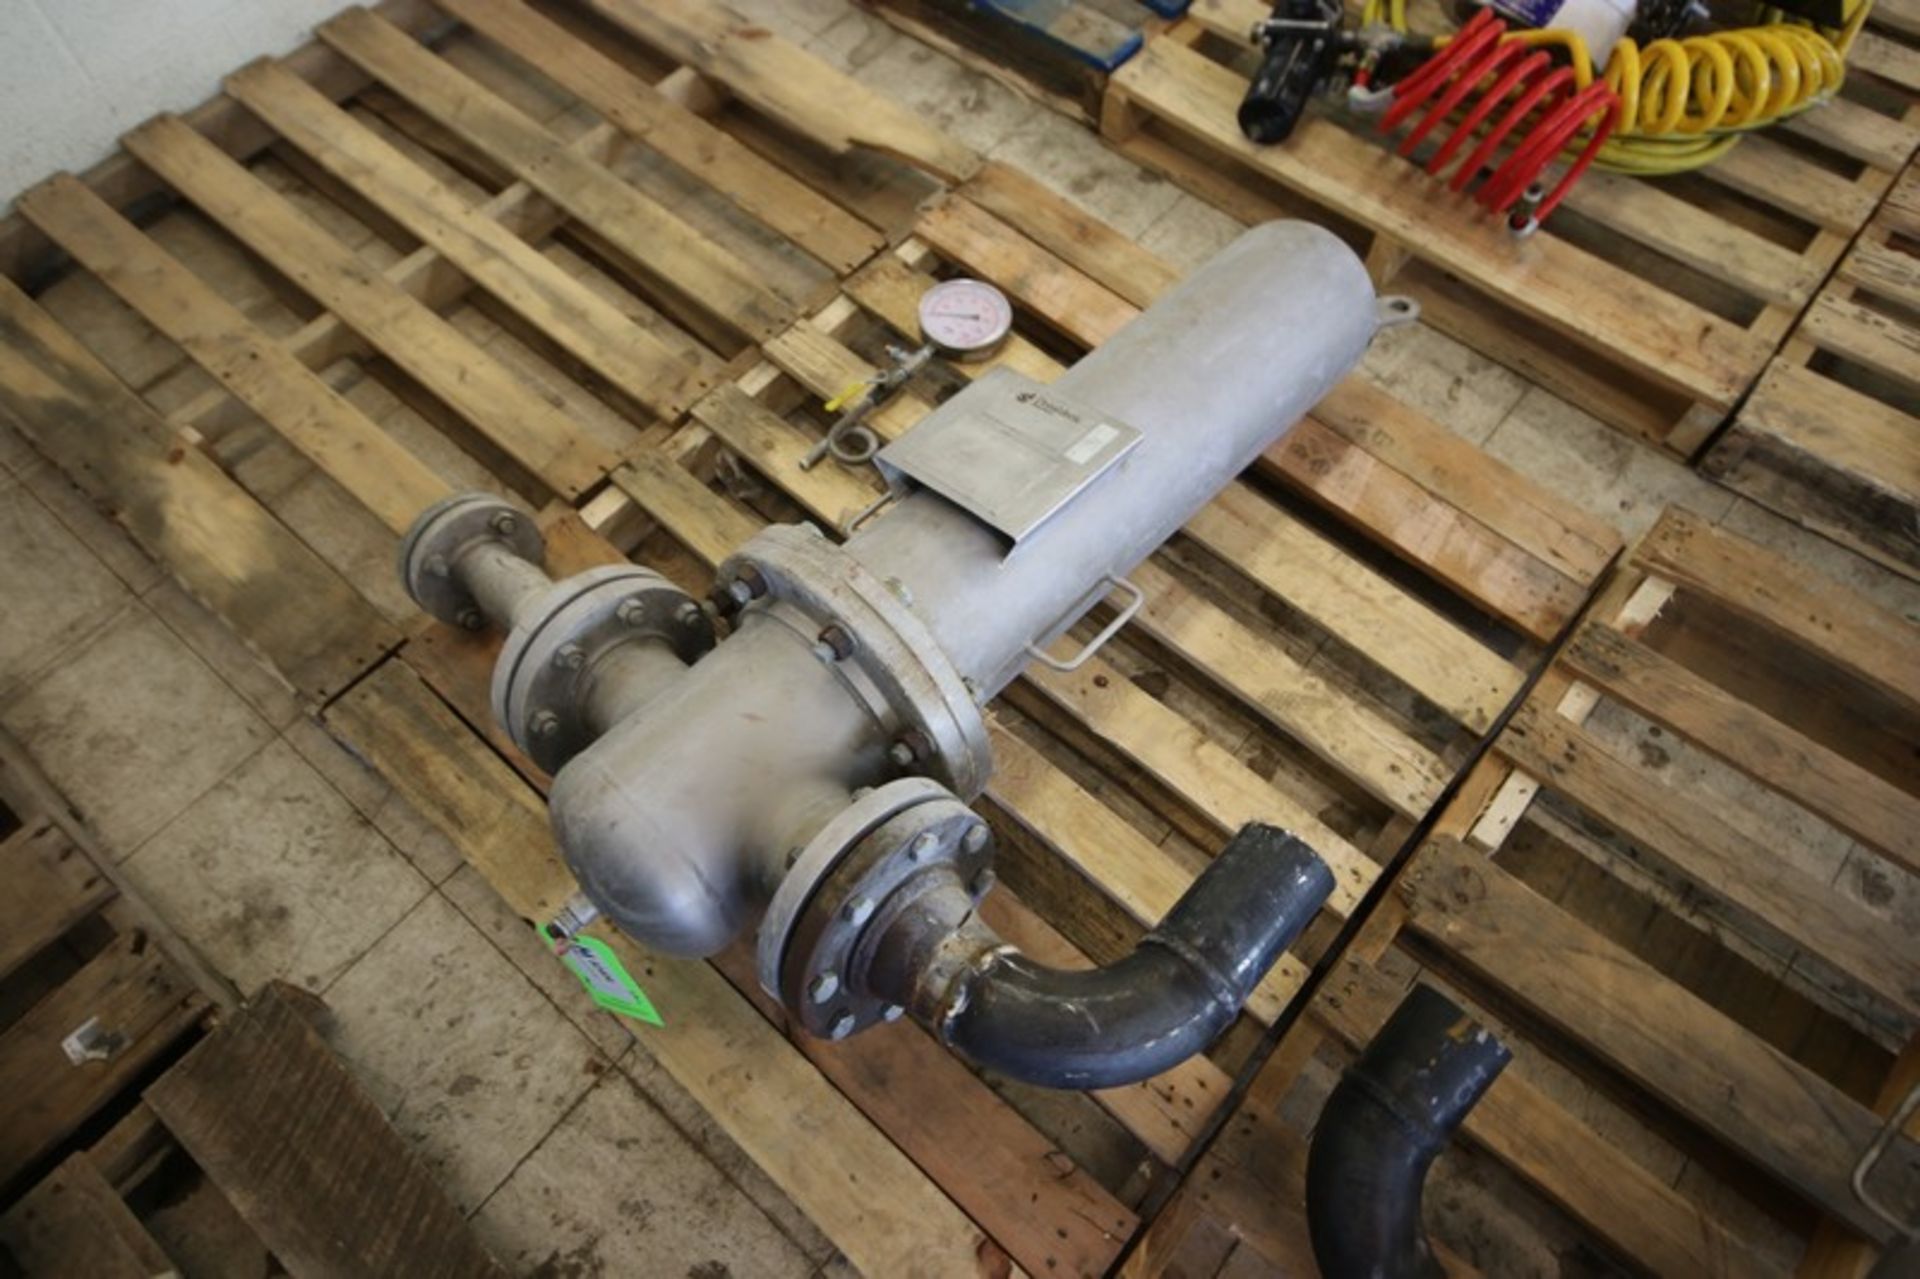 2013 Donaldson Steam Filter,S/N 036261-1-1-3, Housing MAWP 150 PSI @ 300 F, MDMT 20 F @ 150 PSI, - Image 2 of 3